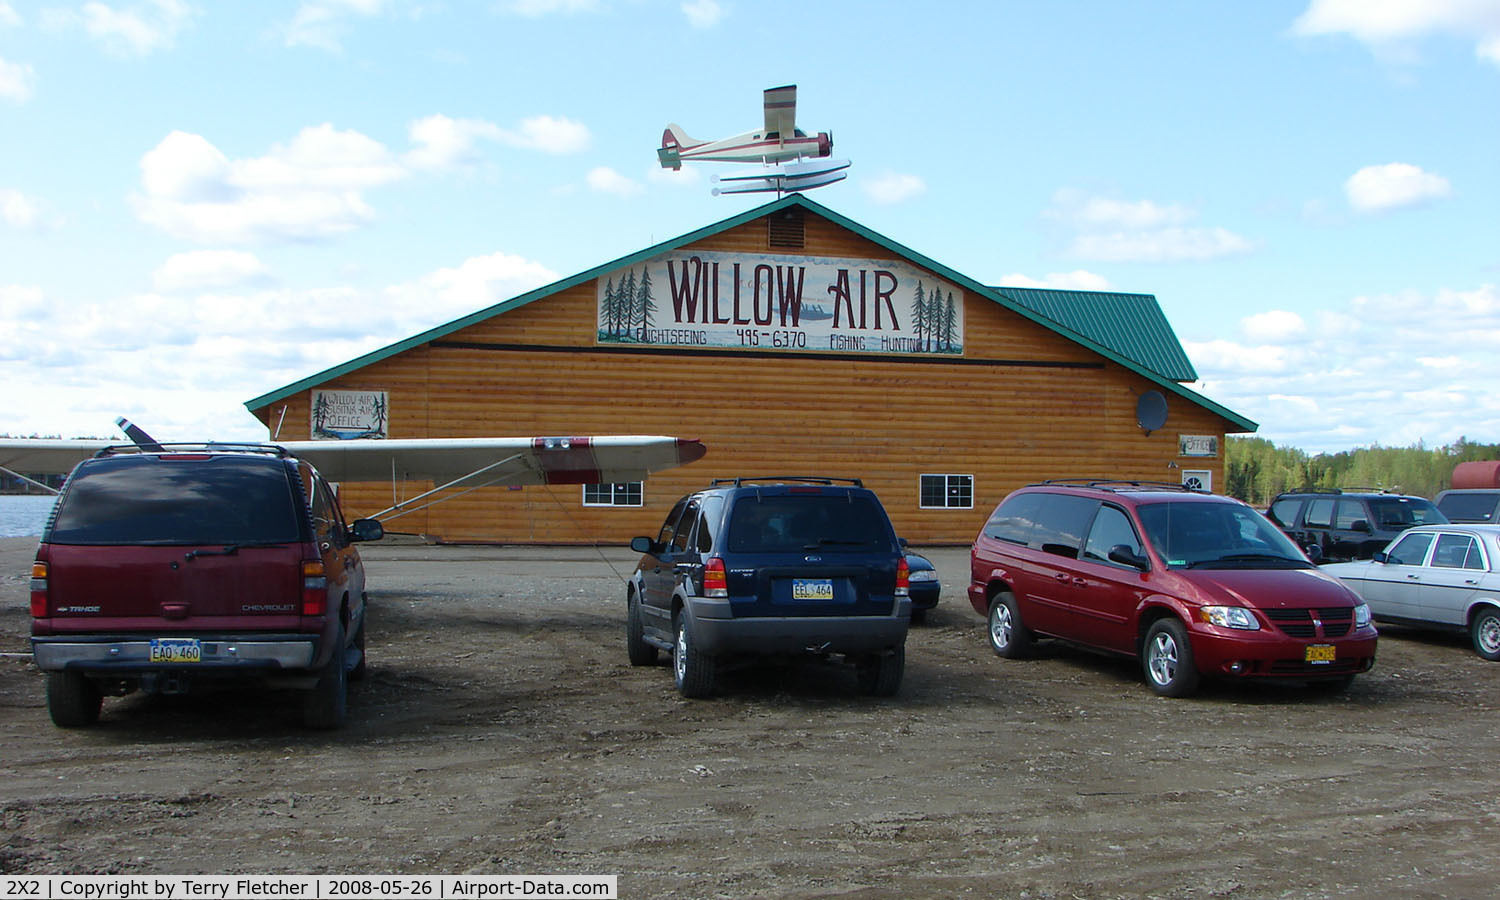 Willow Spb Seaplane Base (2X2) - The Willow Air Maintainenance and Sales Facilty